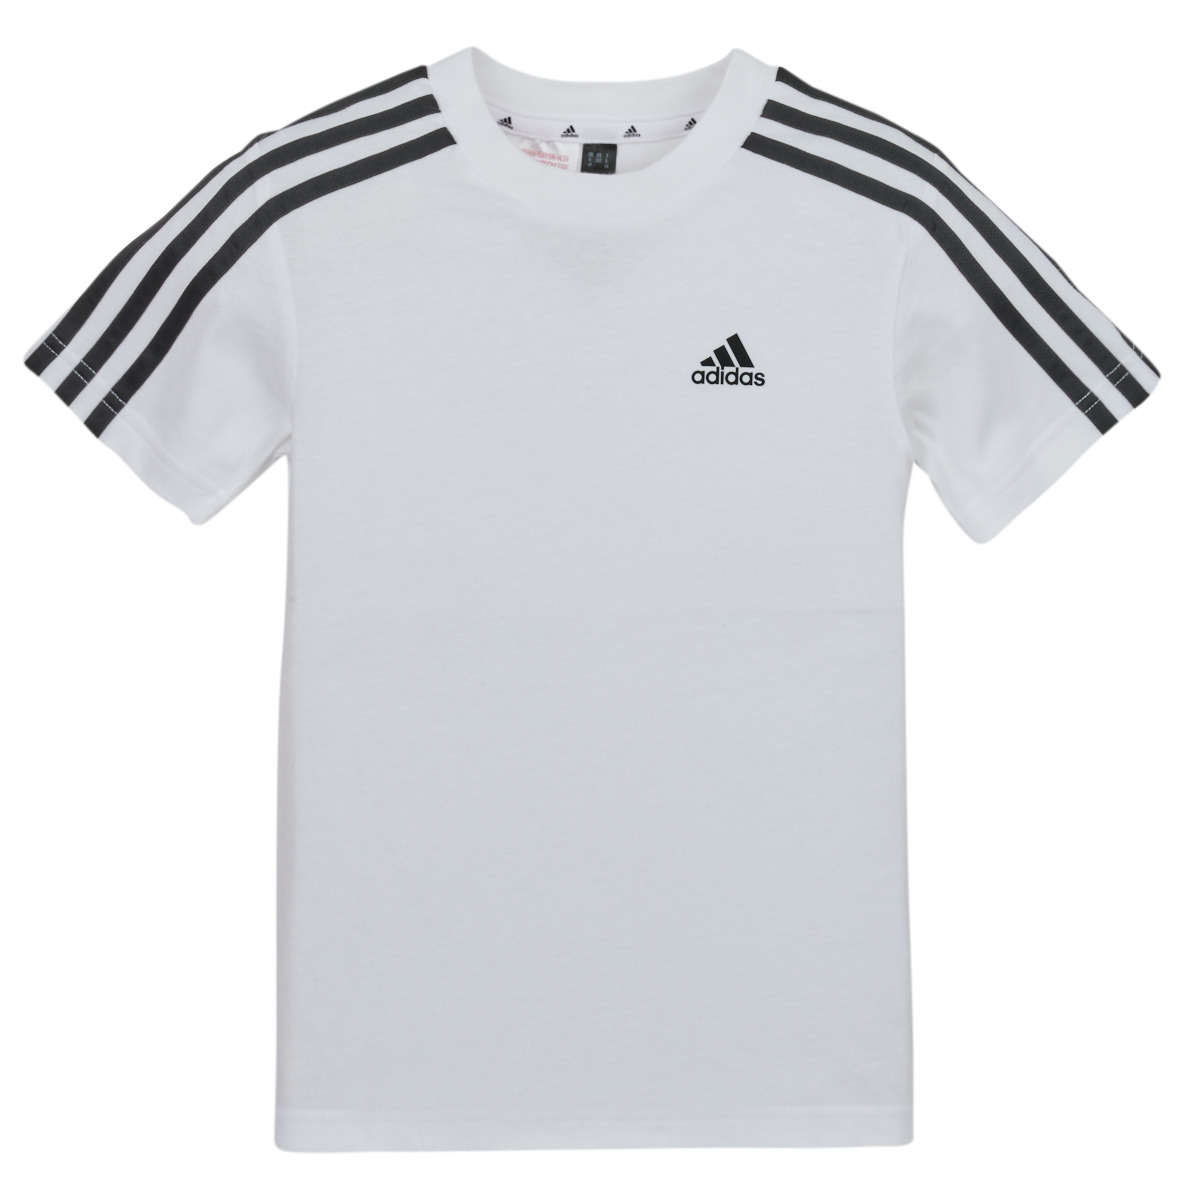 Adidas Sportswear LK 3S CO ! - Free Clothing Delivery with - Child Short-sleeved White t-shirts £ Rubbersole.co.uk TEE